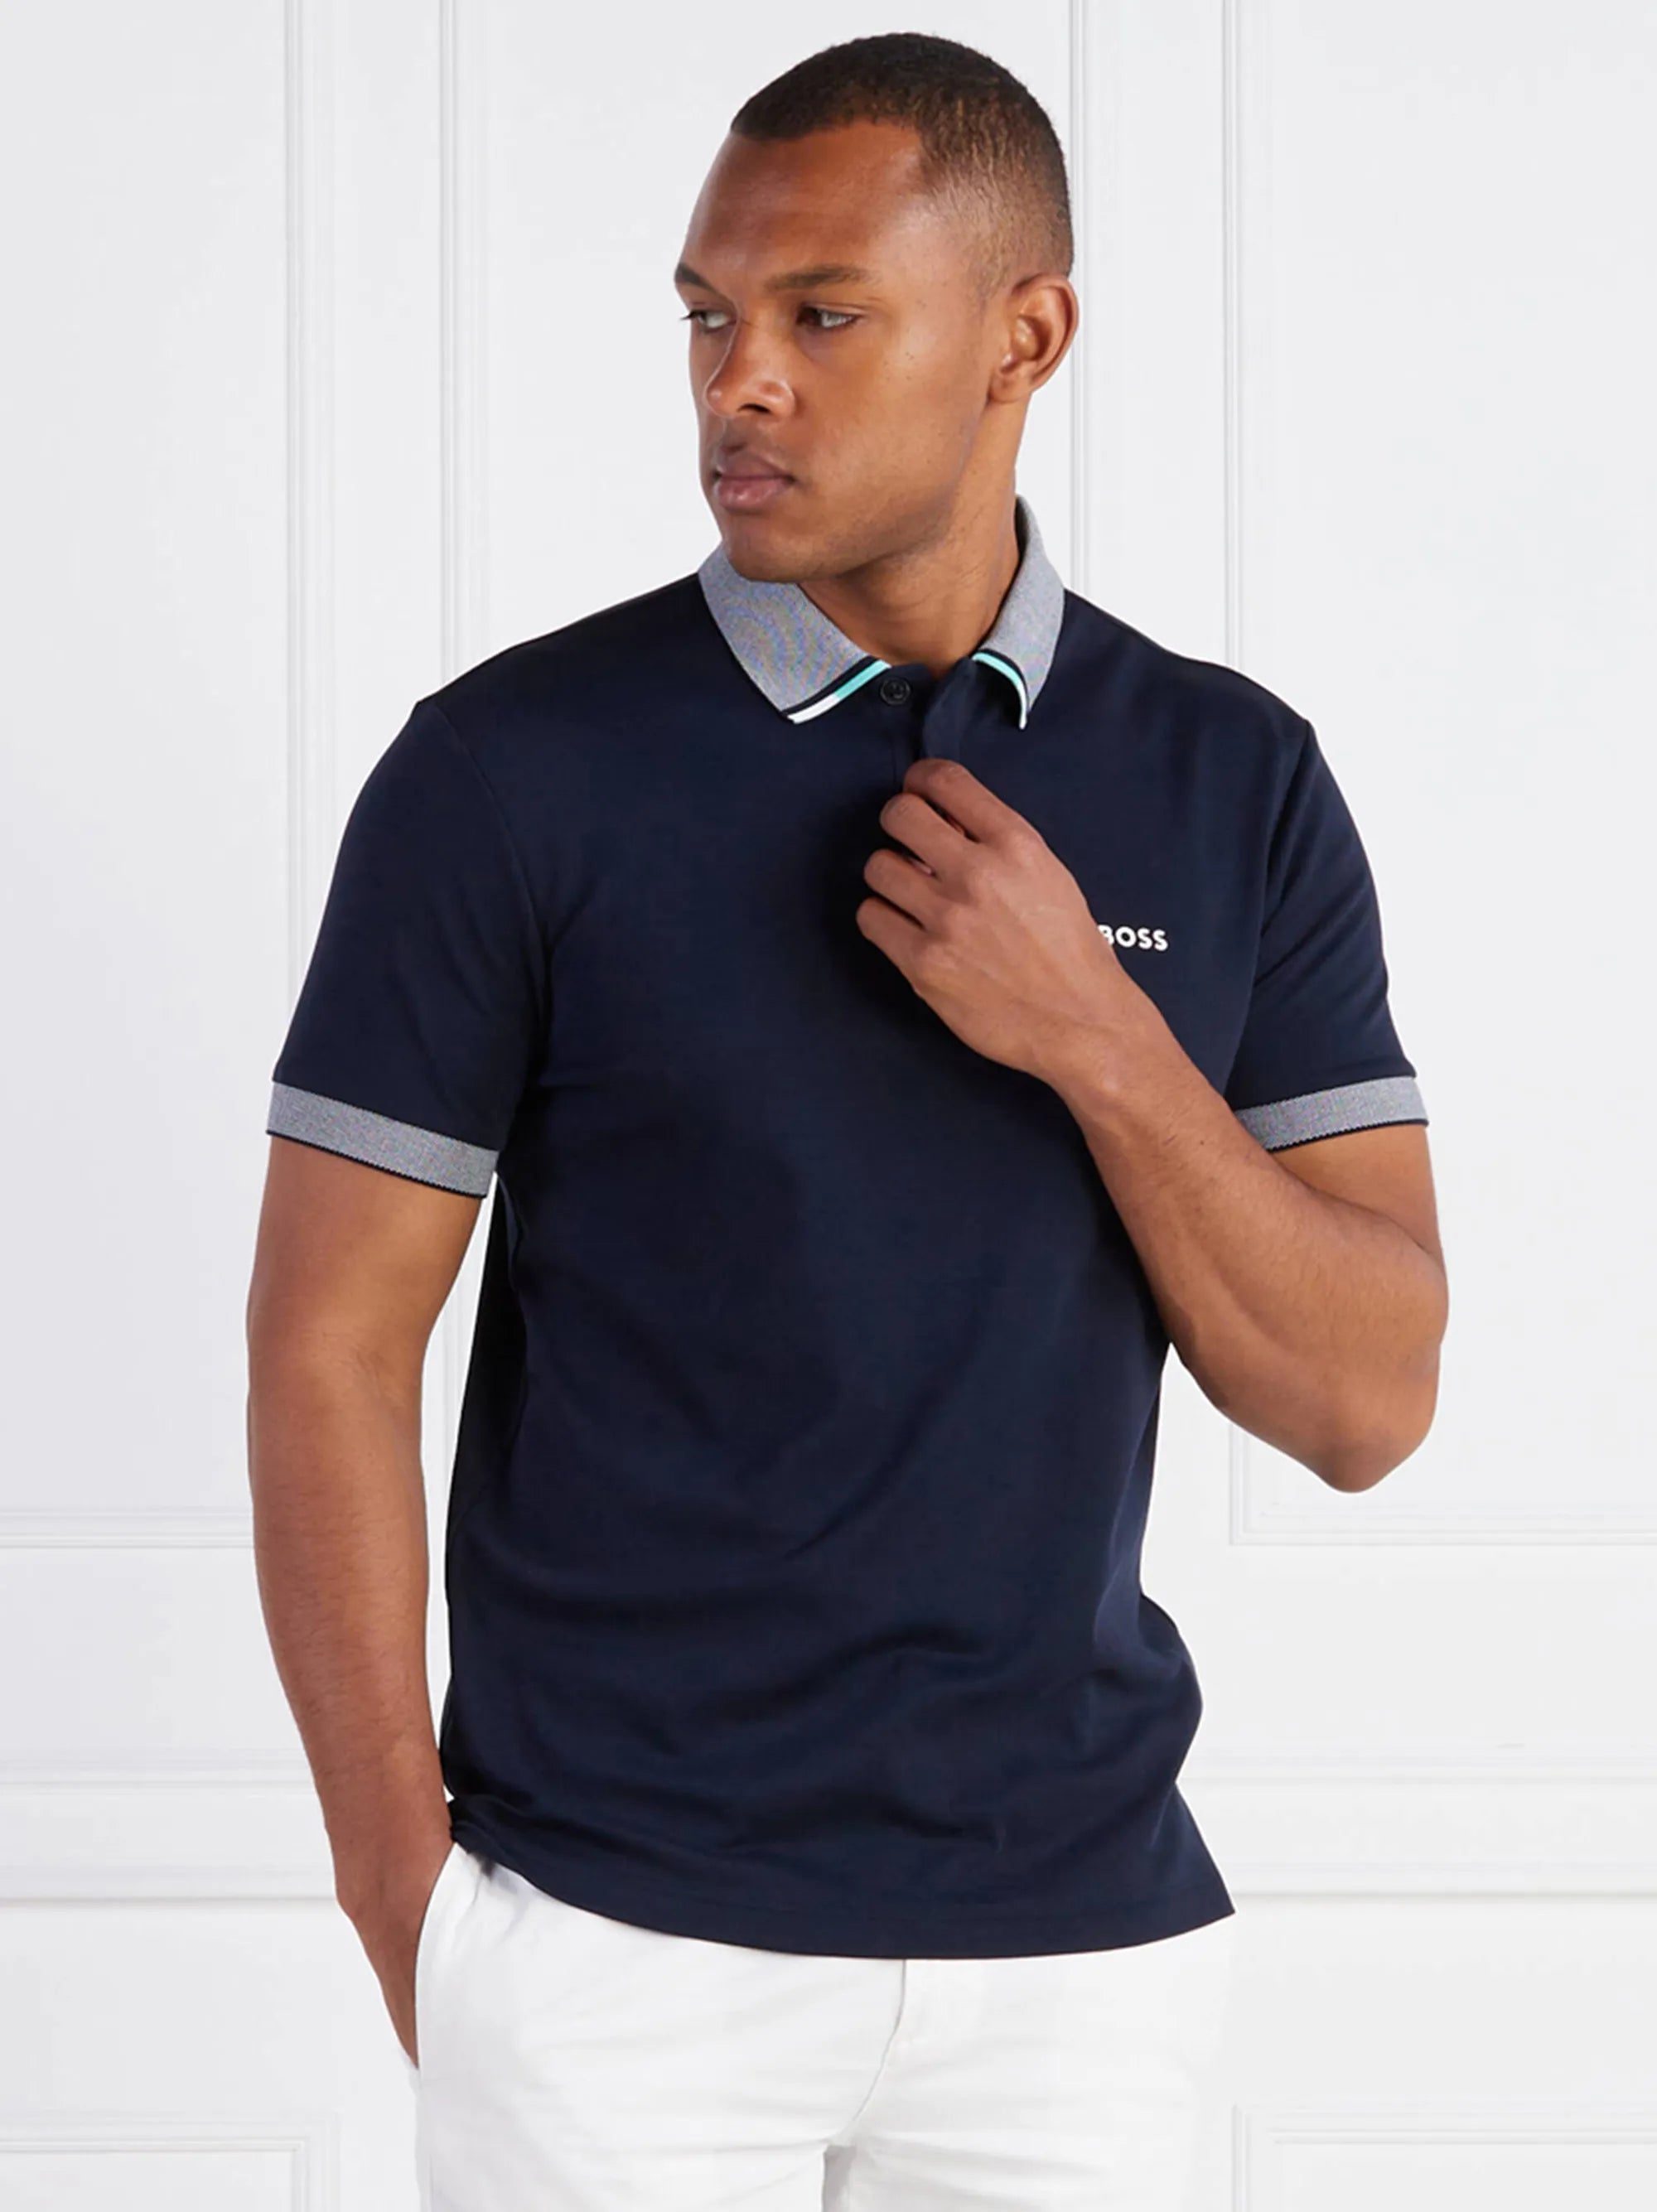 Boss Structured Collar Blue Polo